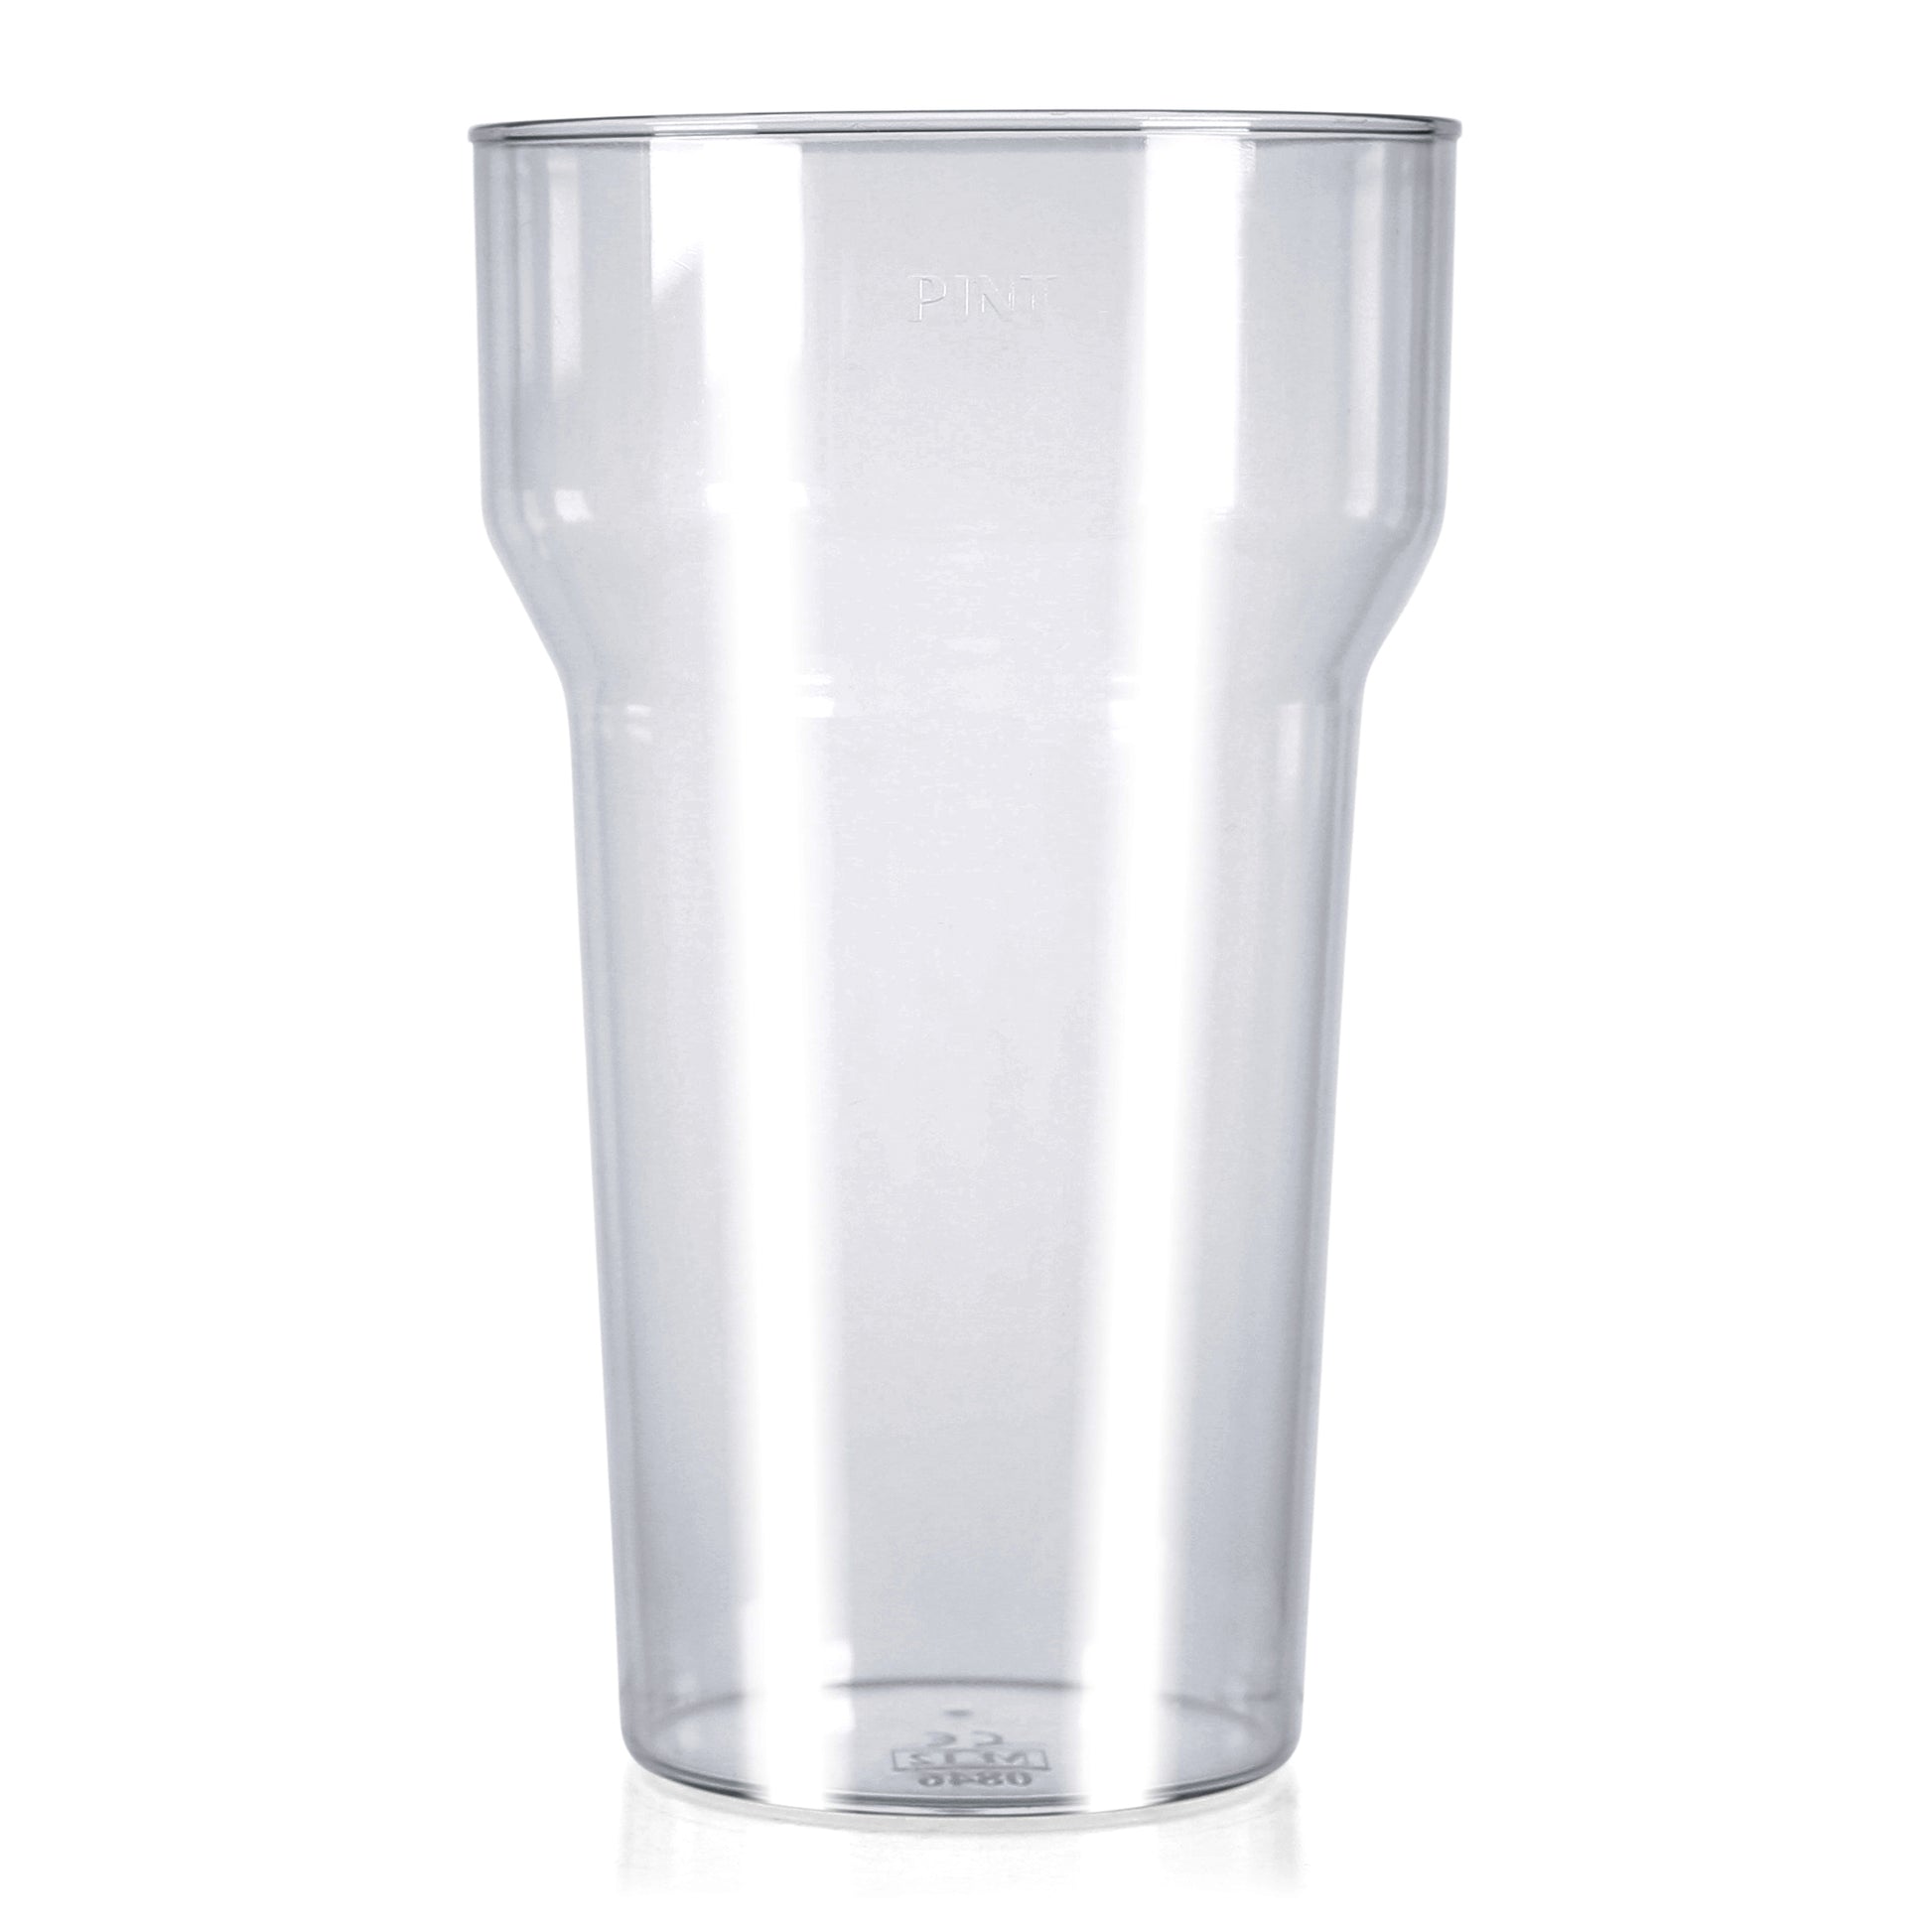 50 x Pint Glasses 568ml Transparent Clear Strong Reusable Plastic CE Marked Beer Cider Lager Drinks Stackable Dishwasher Safe-5056020179993-PCUP-PINTx50-Product Pro-Clear, Pint, Pint Glasses, Plastic Pint Glasses